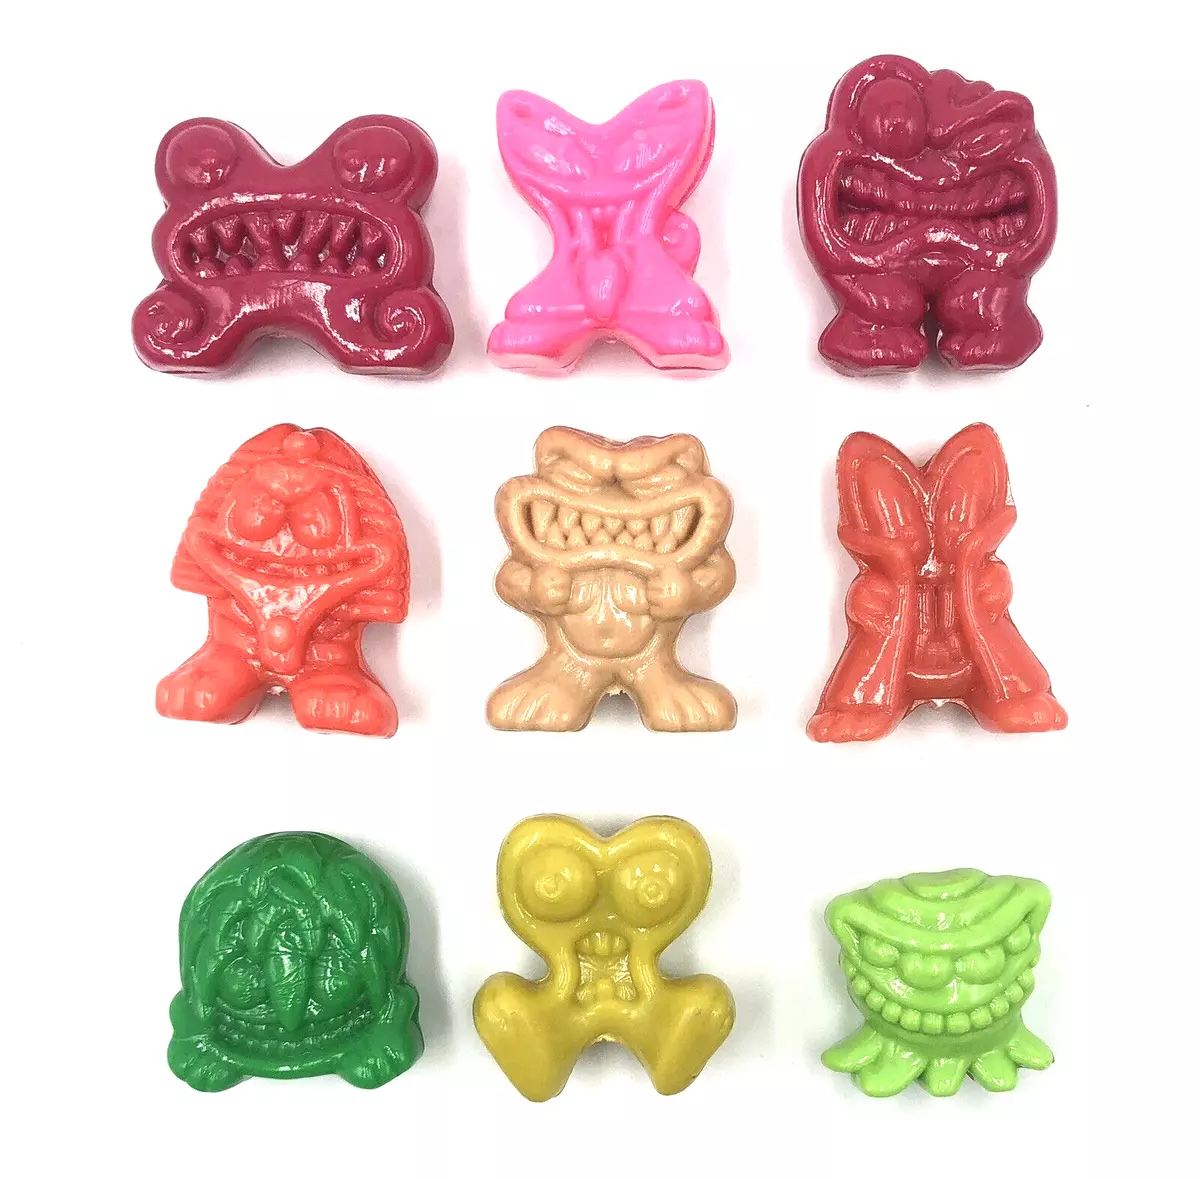 9 Amazing MONSTERS from Gogos Crazy Bones New Generation Series